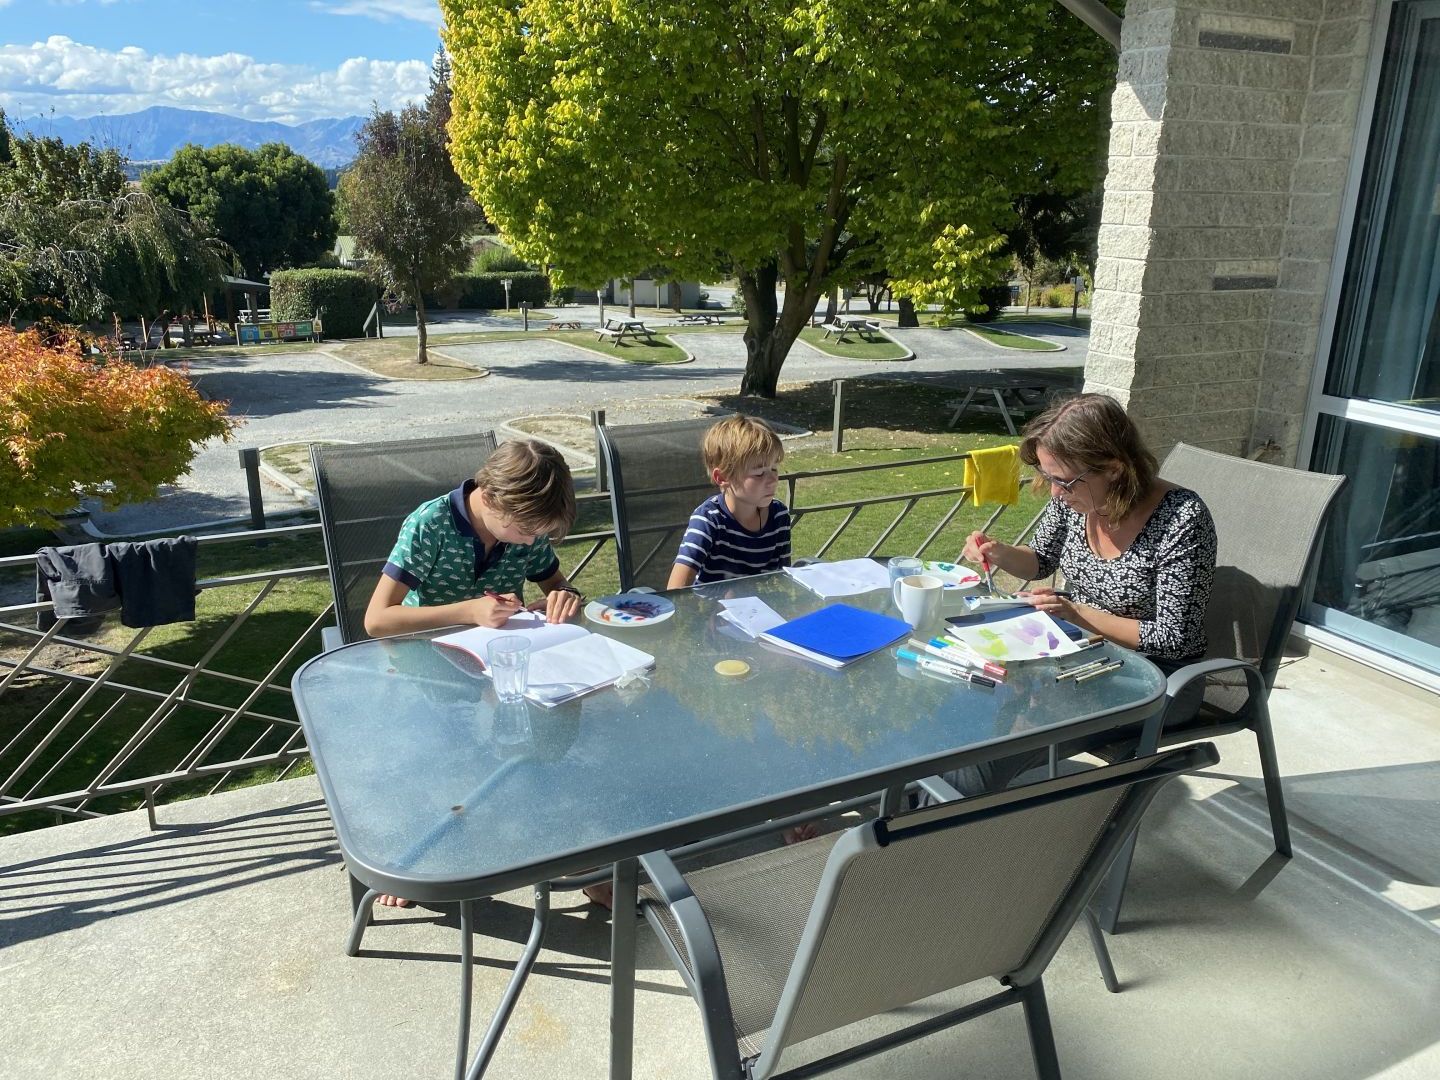 Kids being homeschooled while staying at Wanaka Top 10 Holiday park during COVID-19 lockdown.